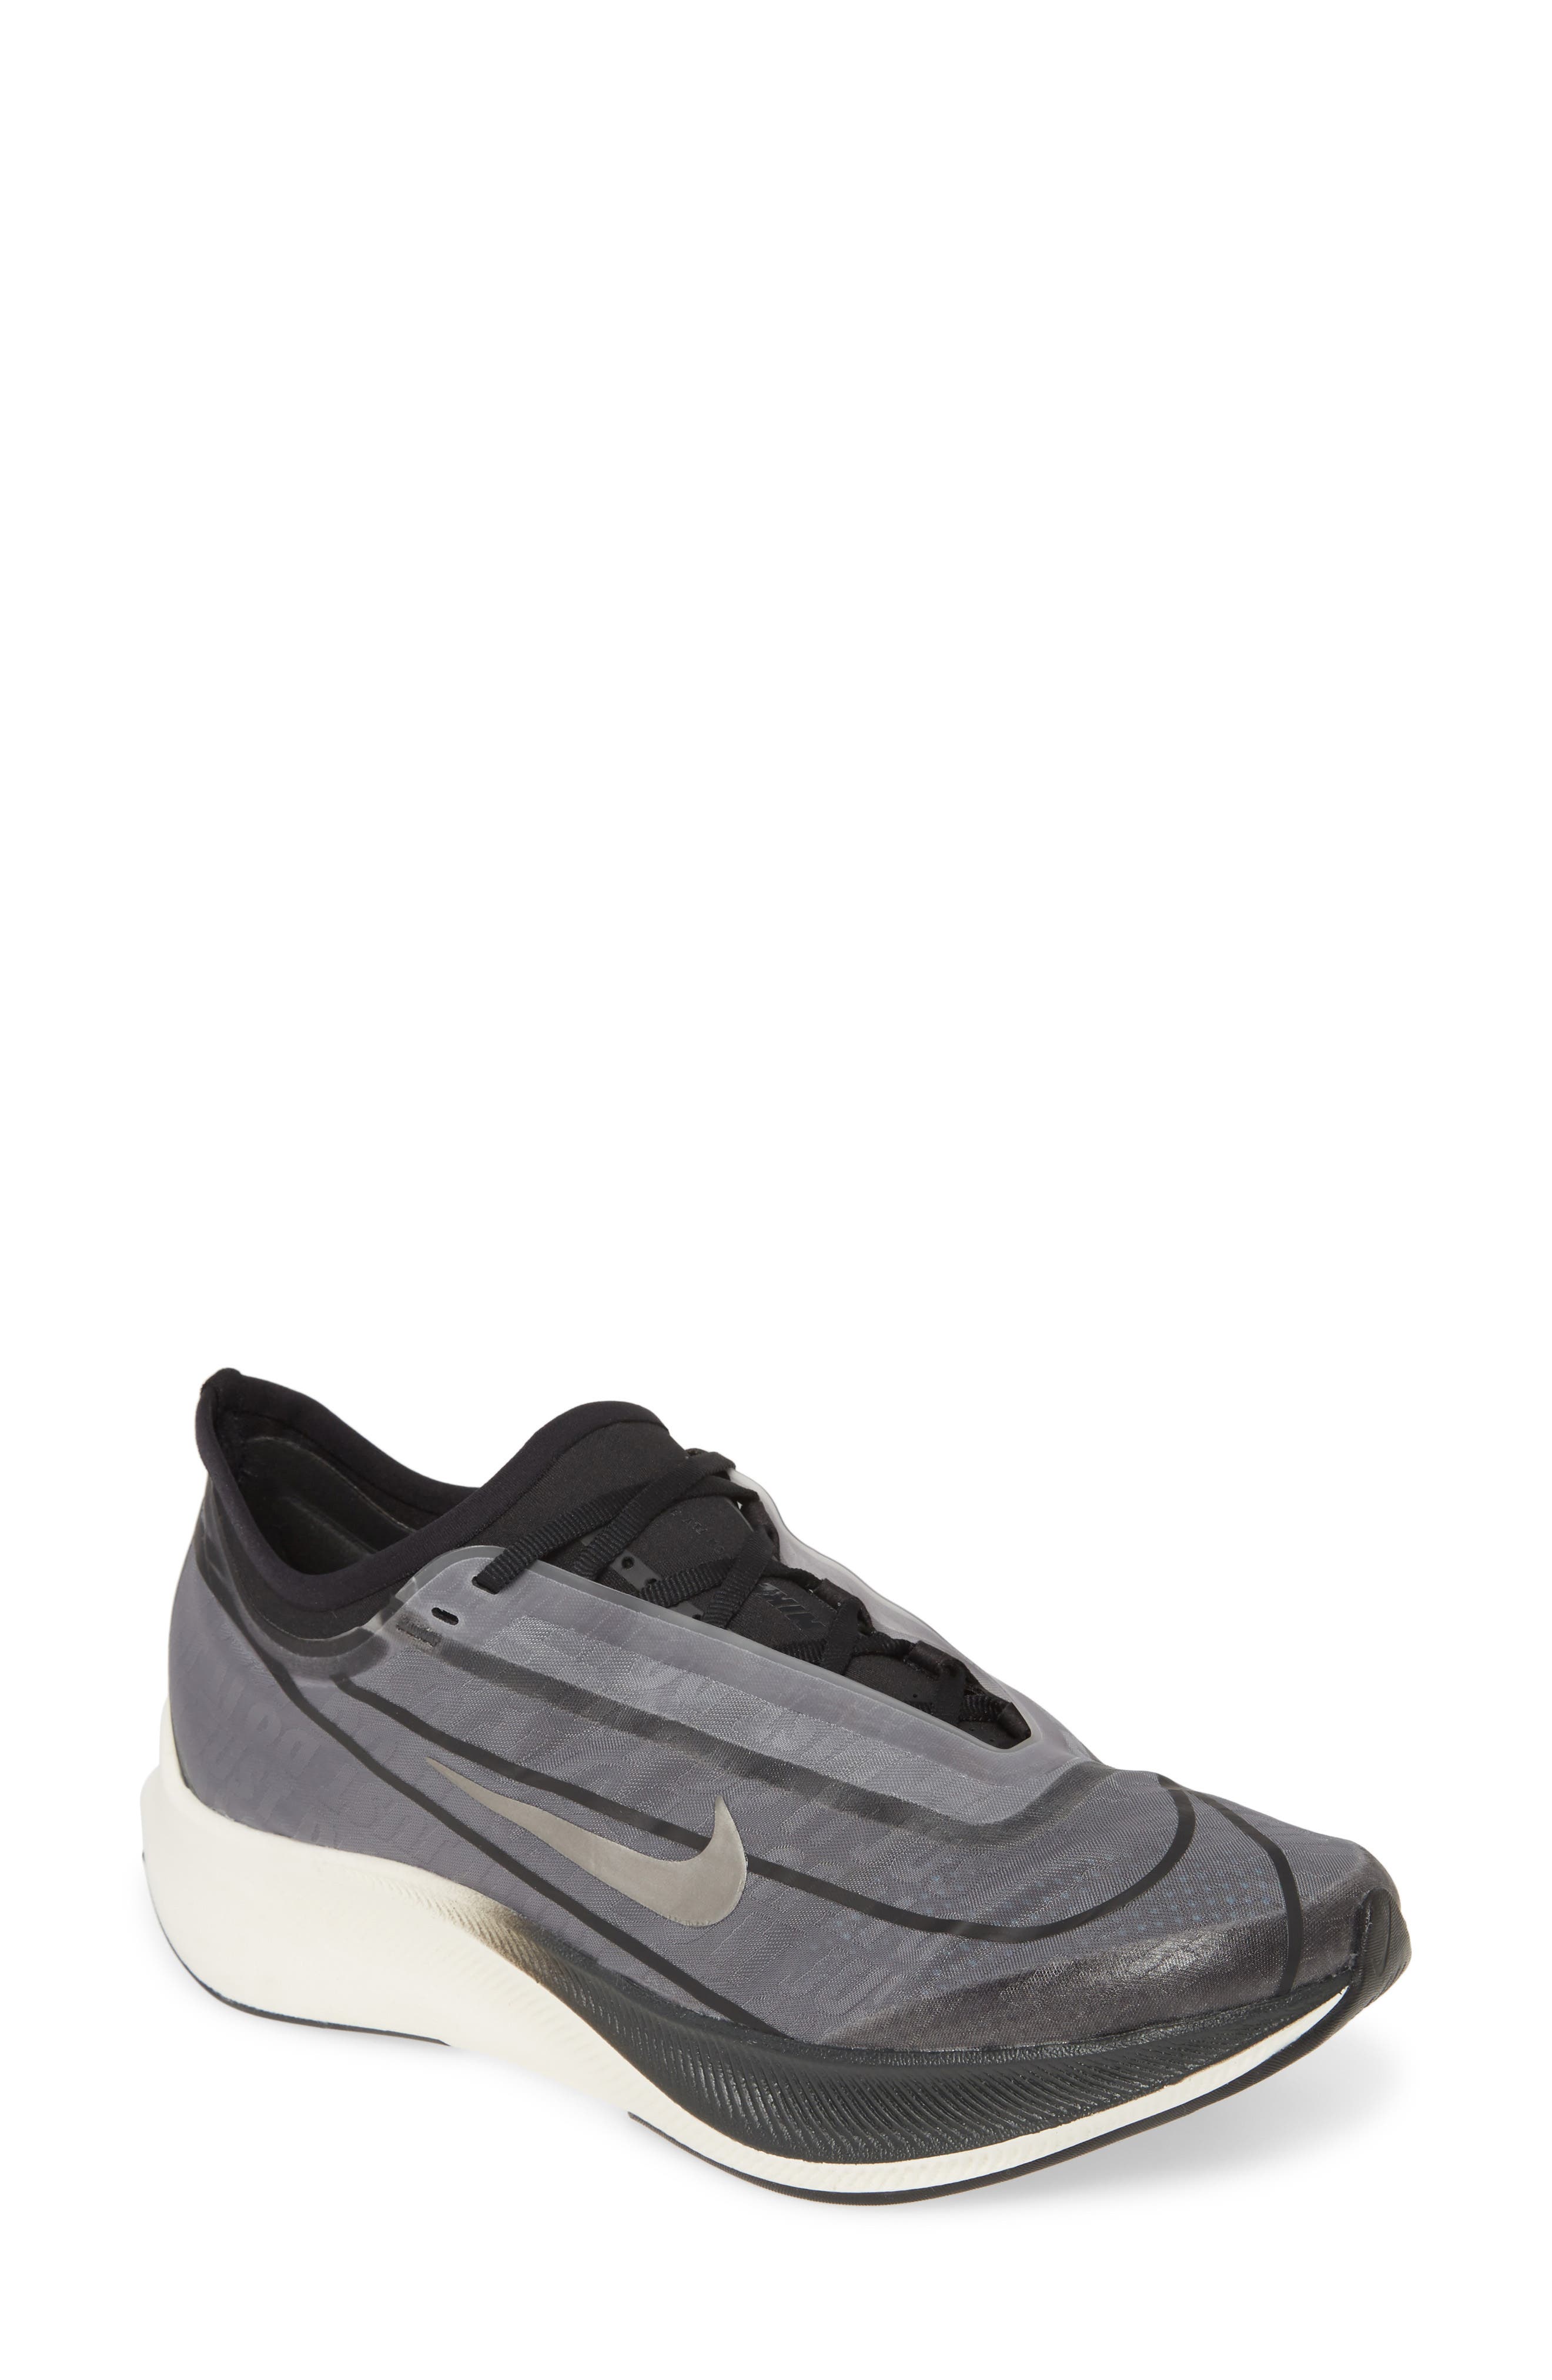 nike zoom fly 3 womens running shoes